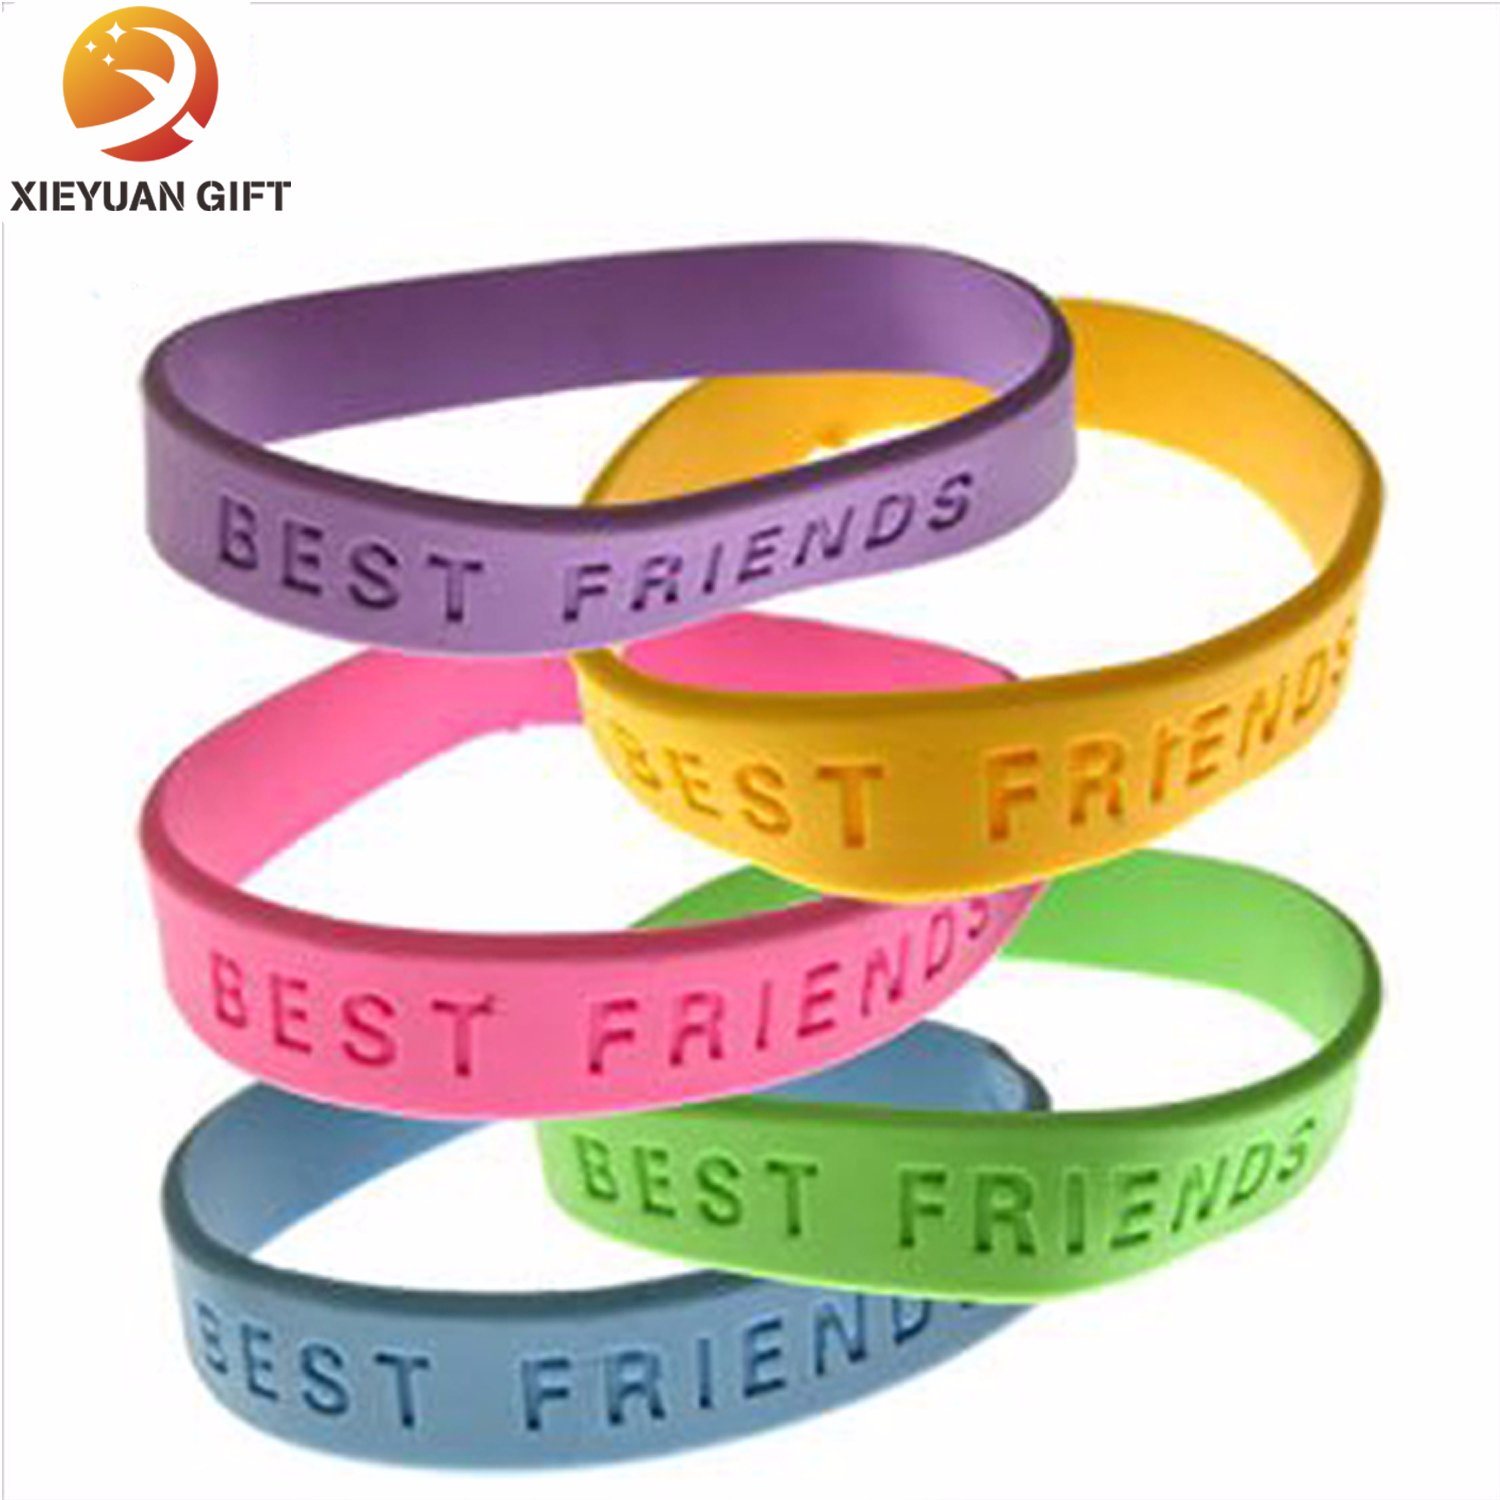 Inspirational Sayings Bracelets Assorted Colors Thin Silicone Wristbands